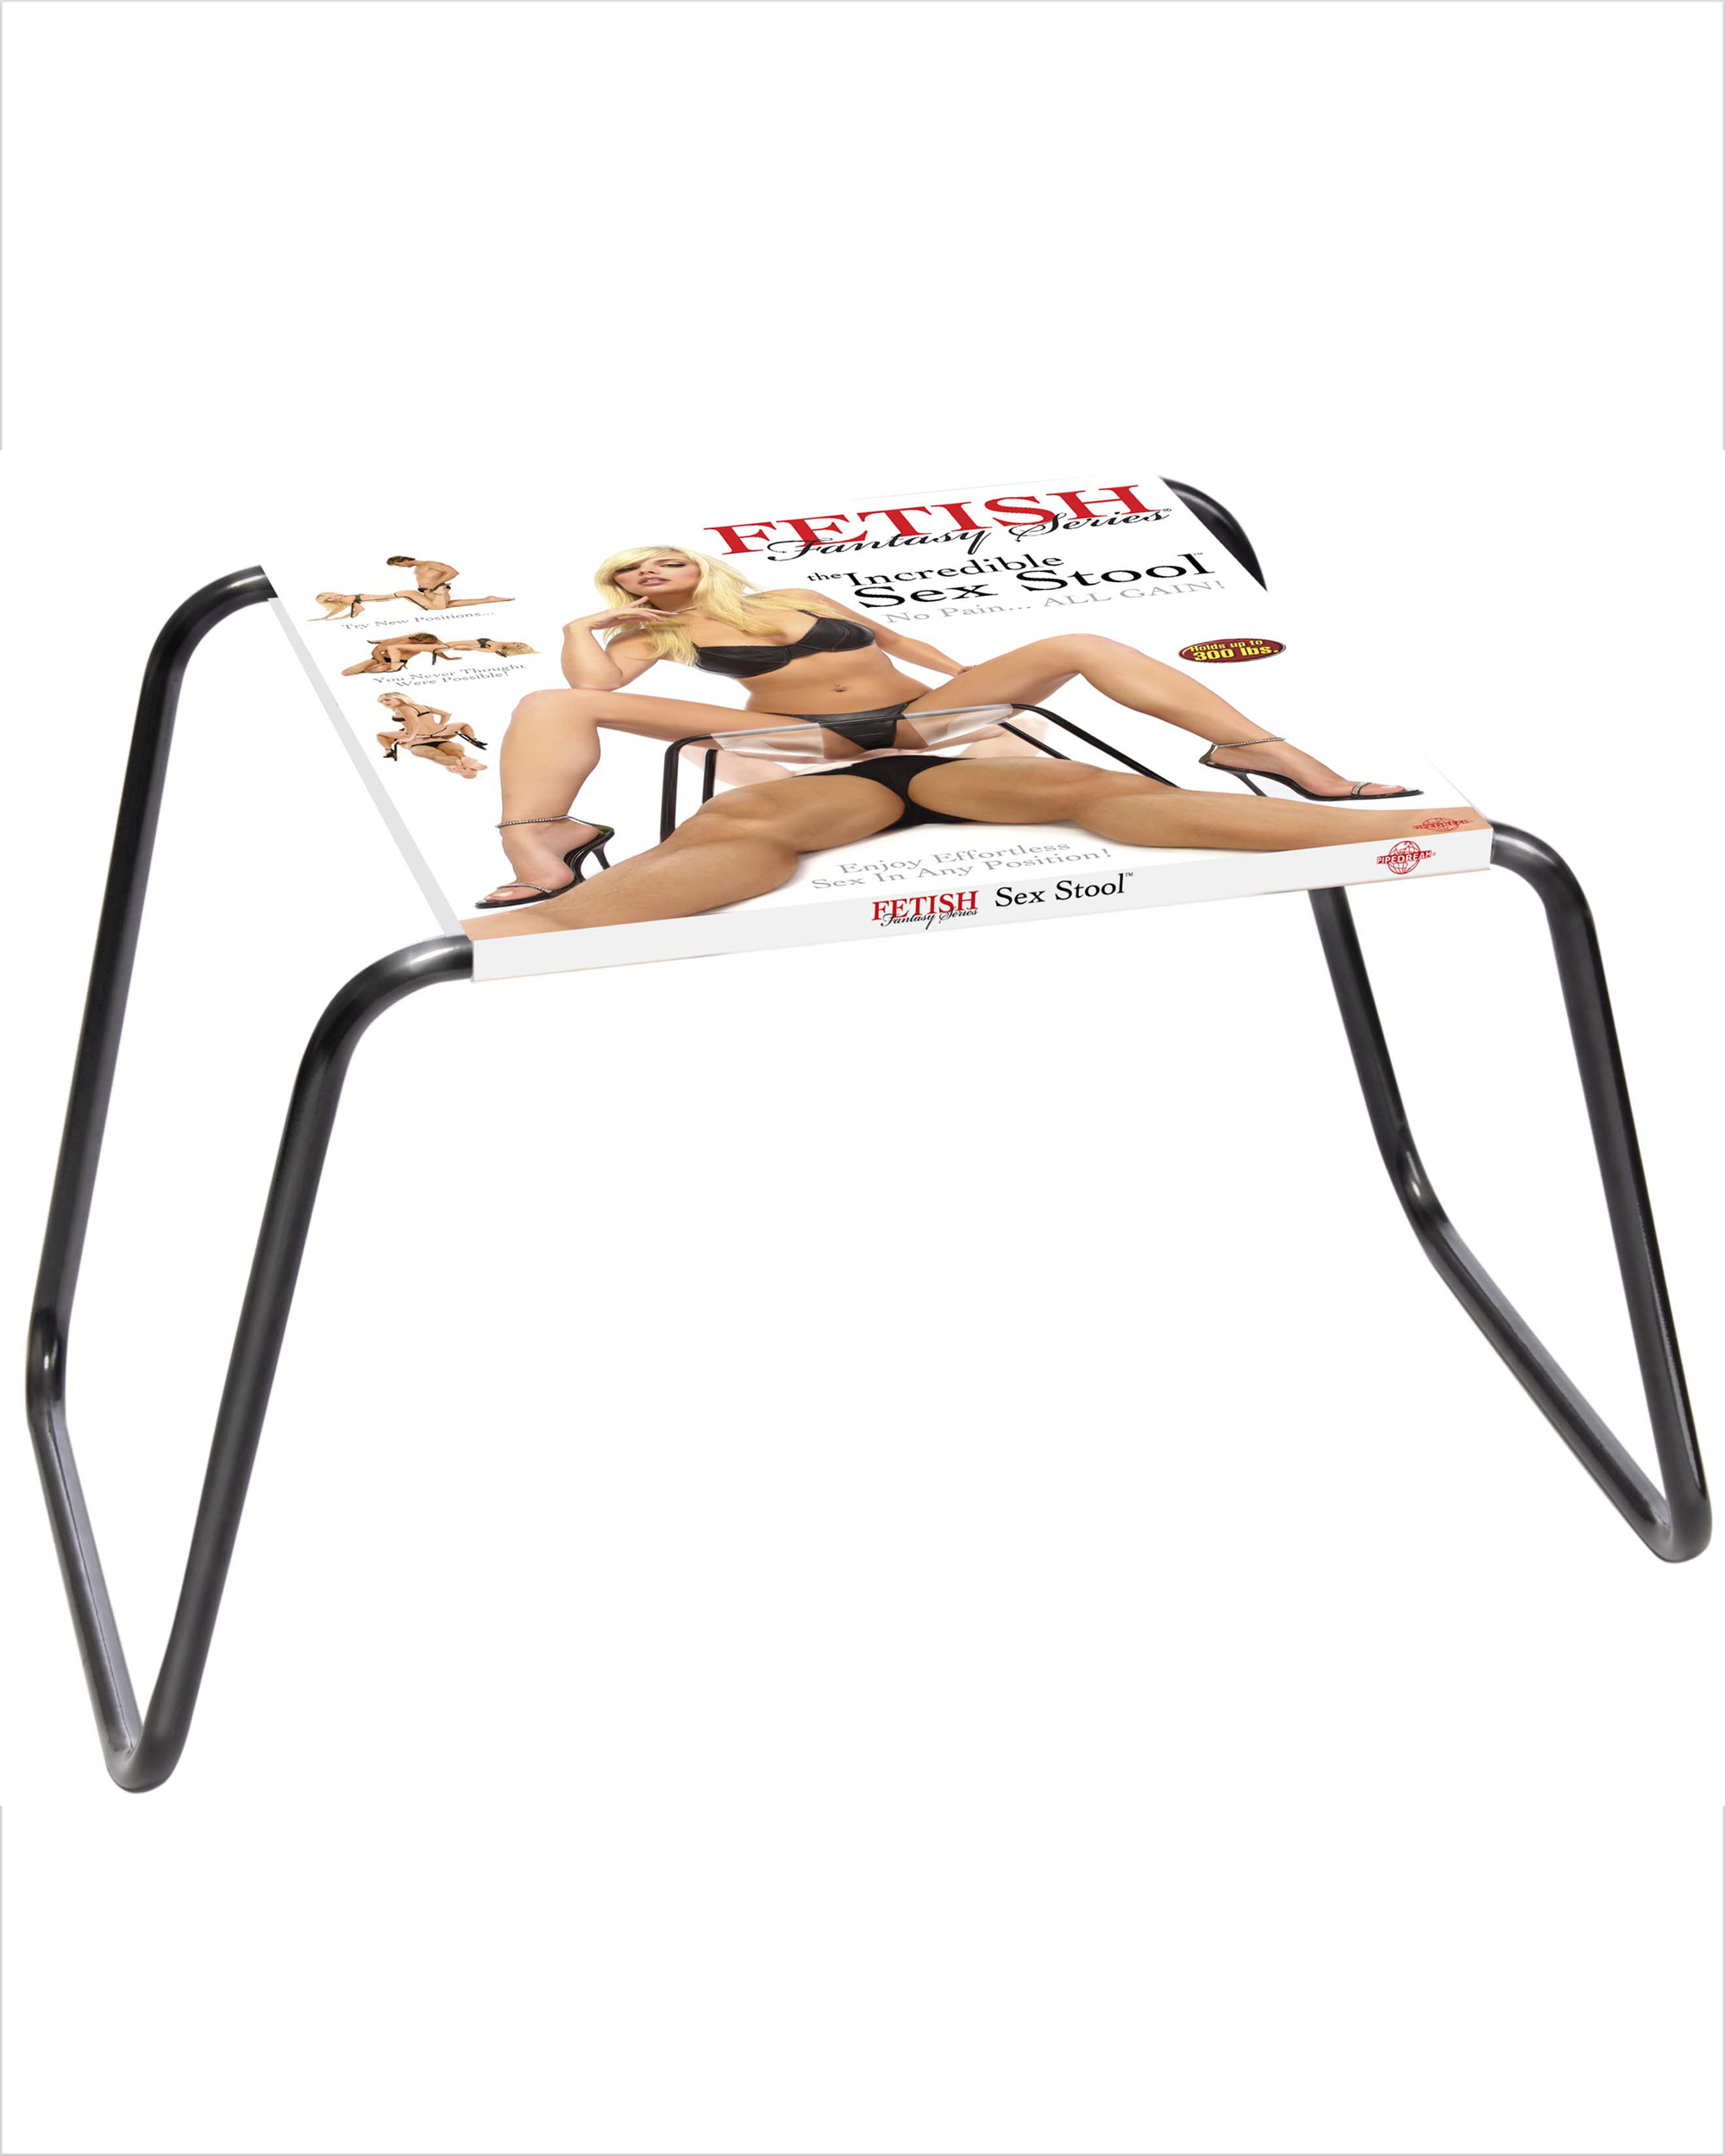 FETISH FANTASY THE INCREDIBLE SEX STOOL  - PD219800